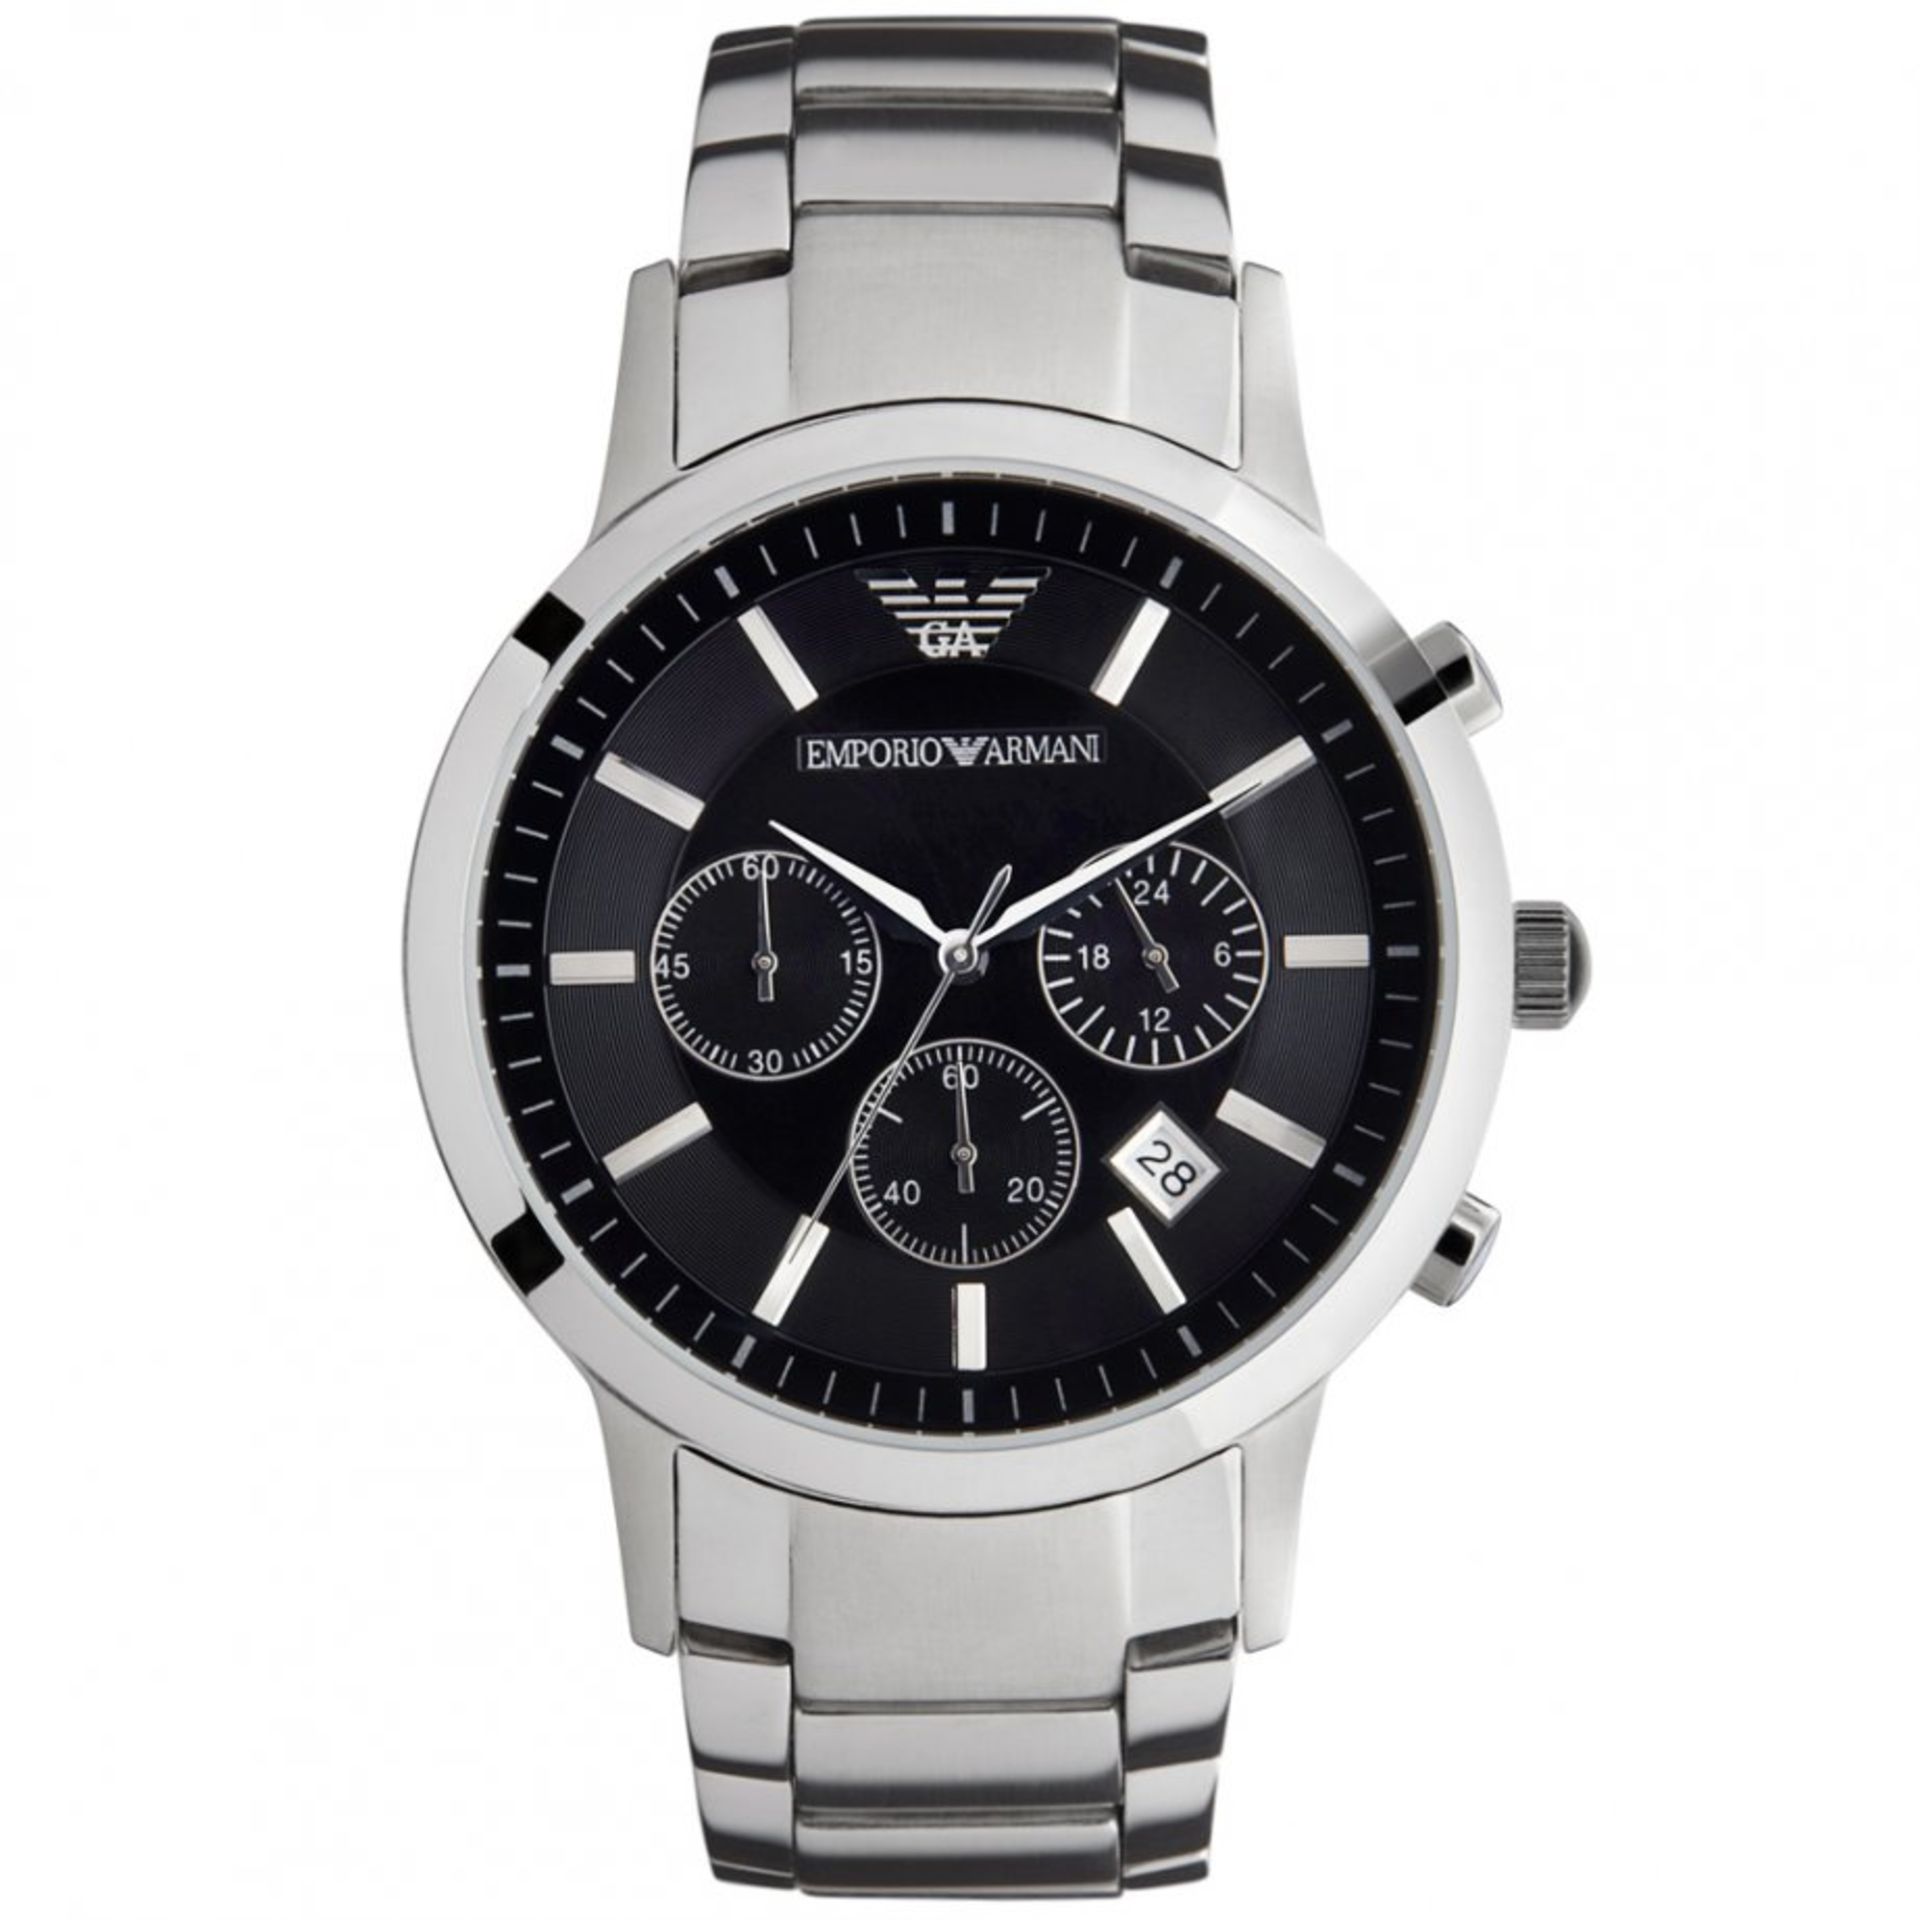 Gents Emporio Armani watch, model number AR2434, stainless steel with chunky bracelet strap. Round